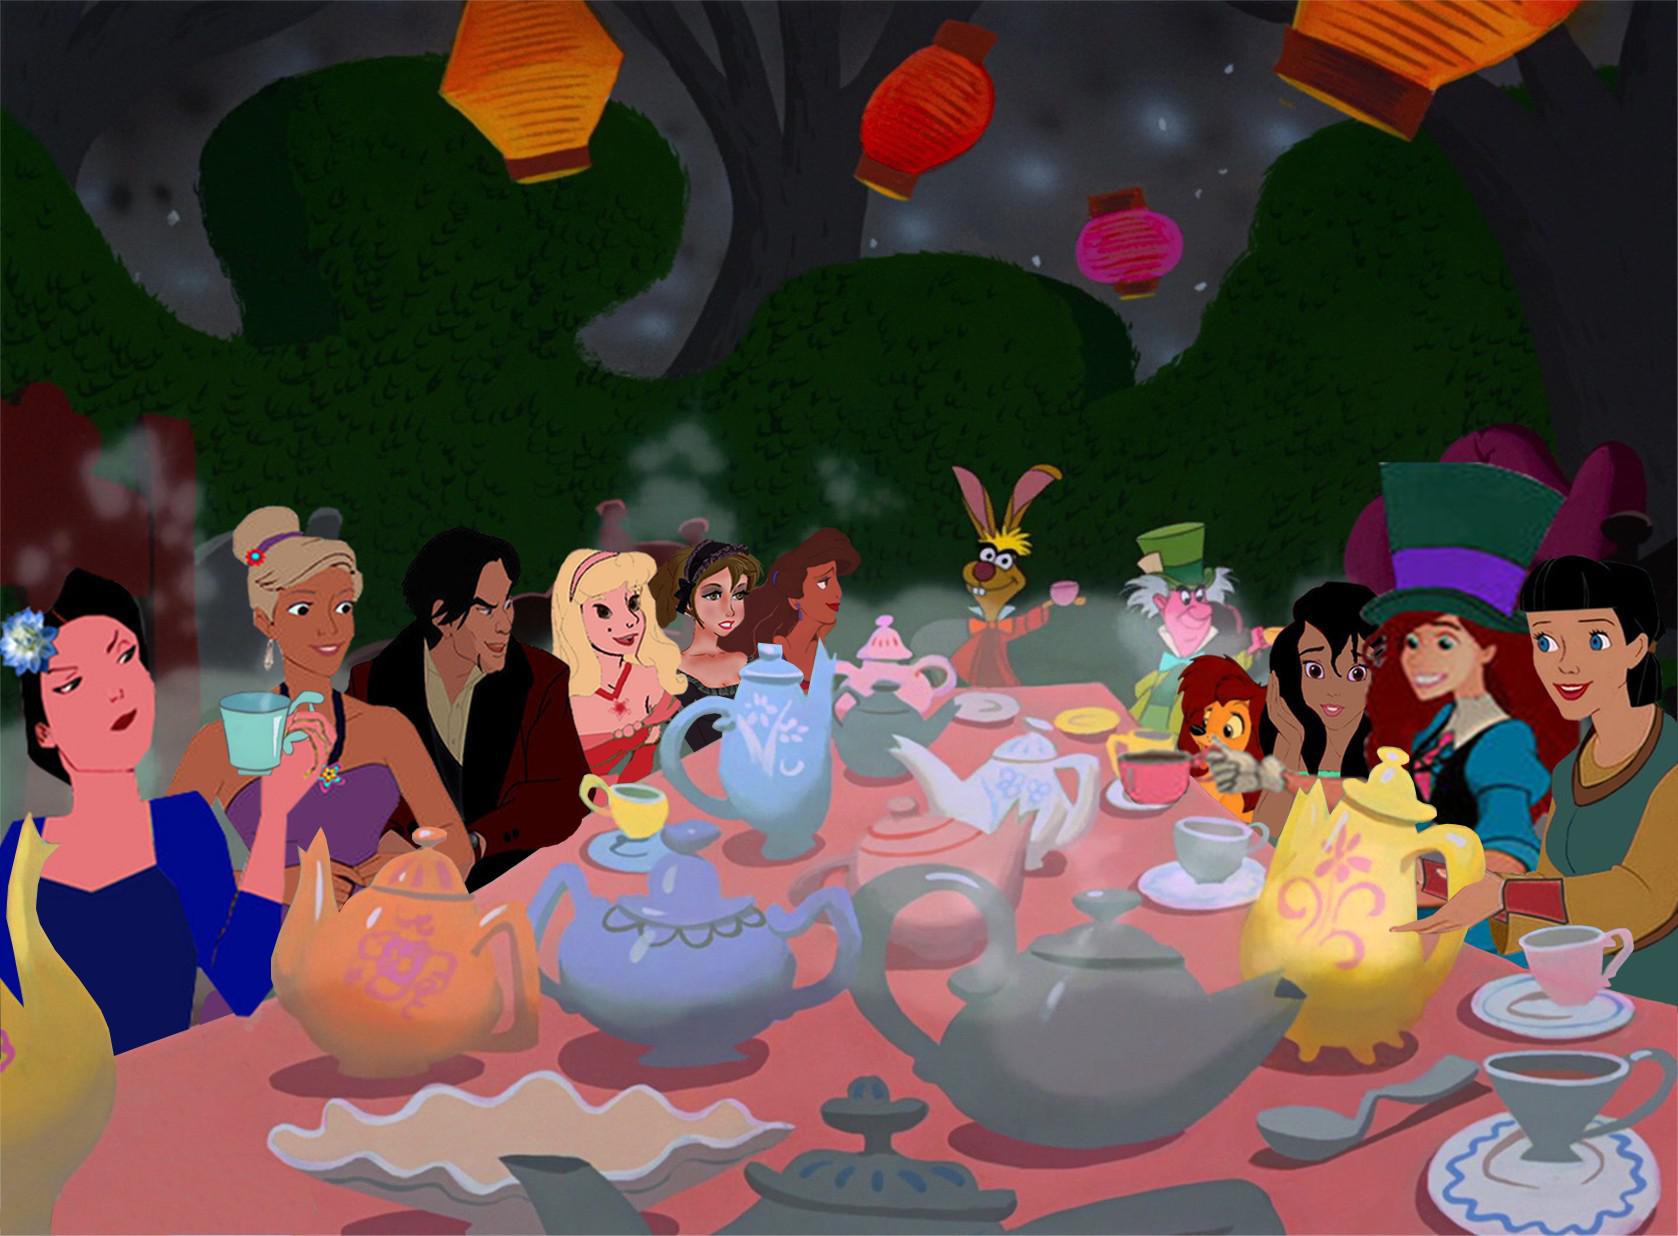 The Tea Party Quality Picture Disney Alice In Wonderland Mad Tea Party Hd Wallpaper Backgrounds Download